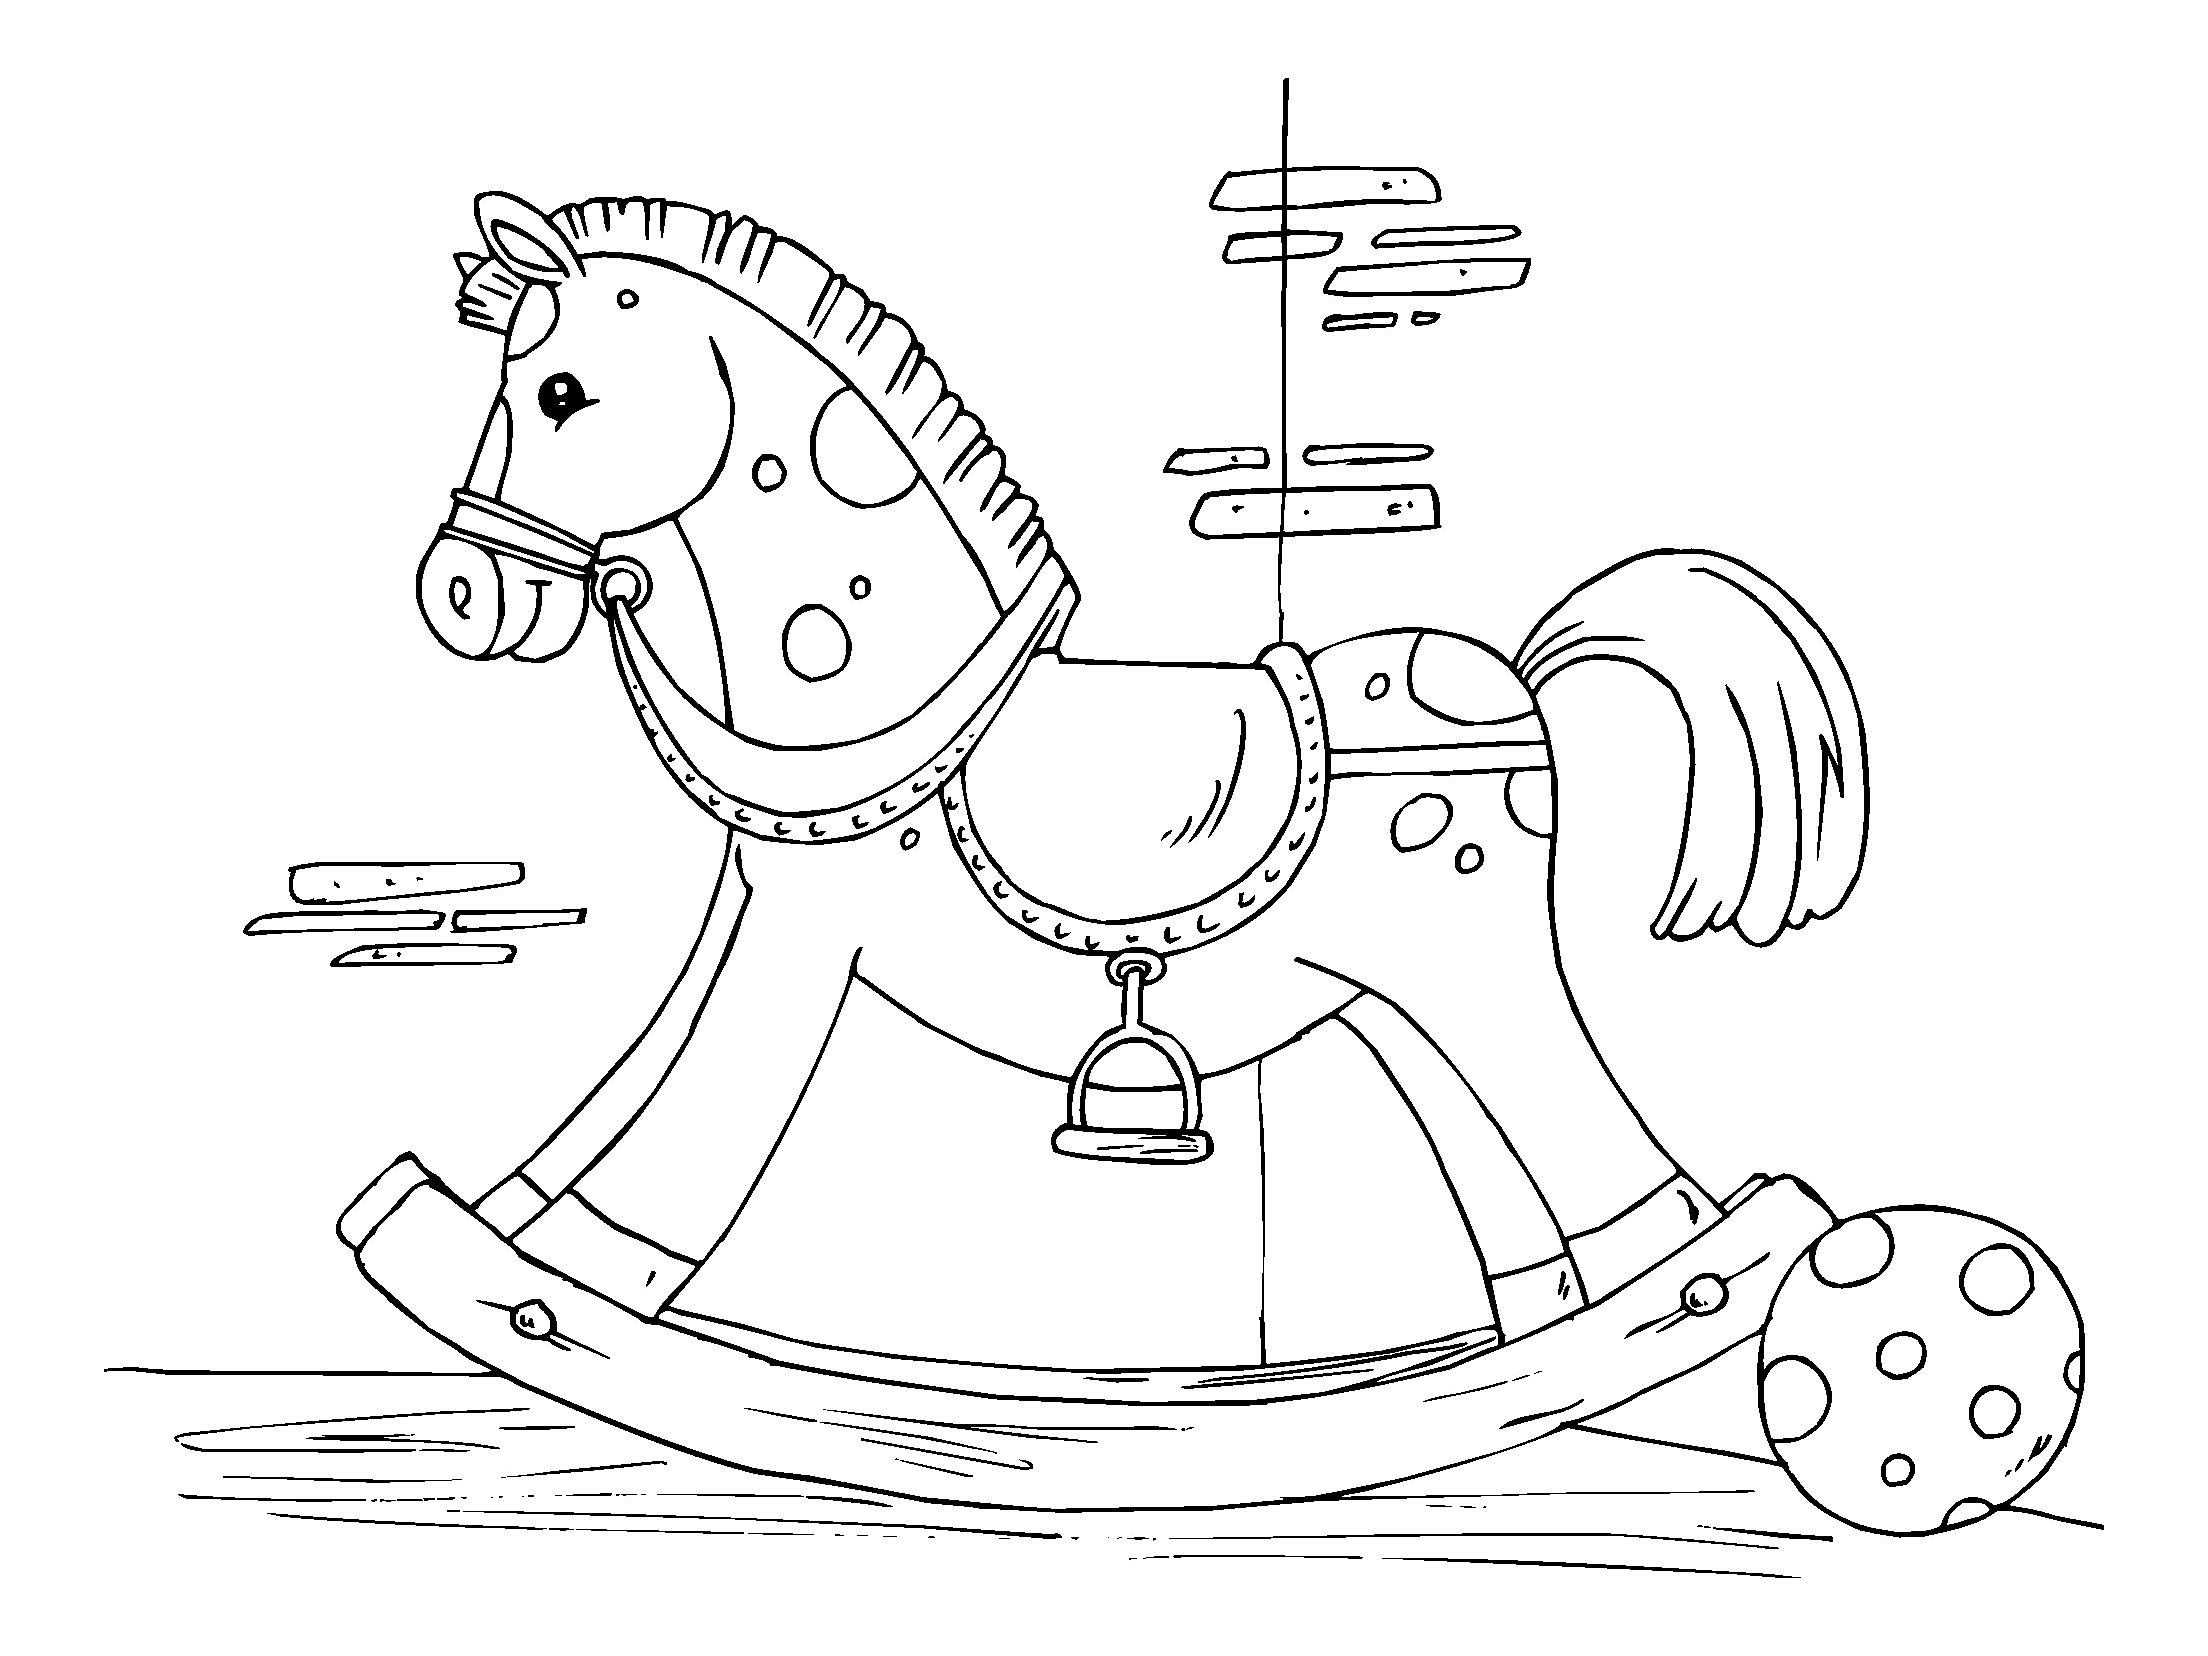 Coloring page - Rocking horse